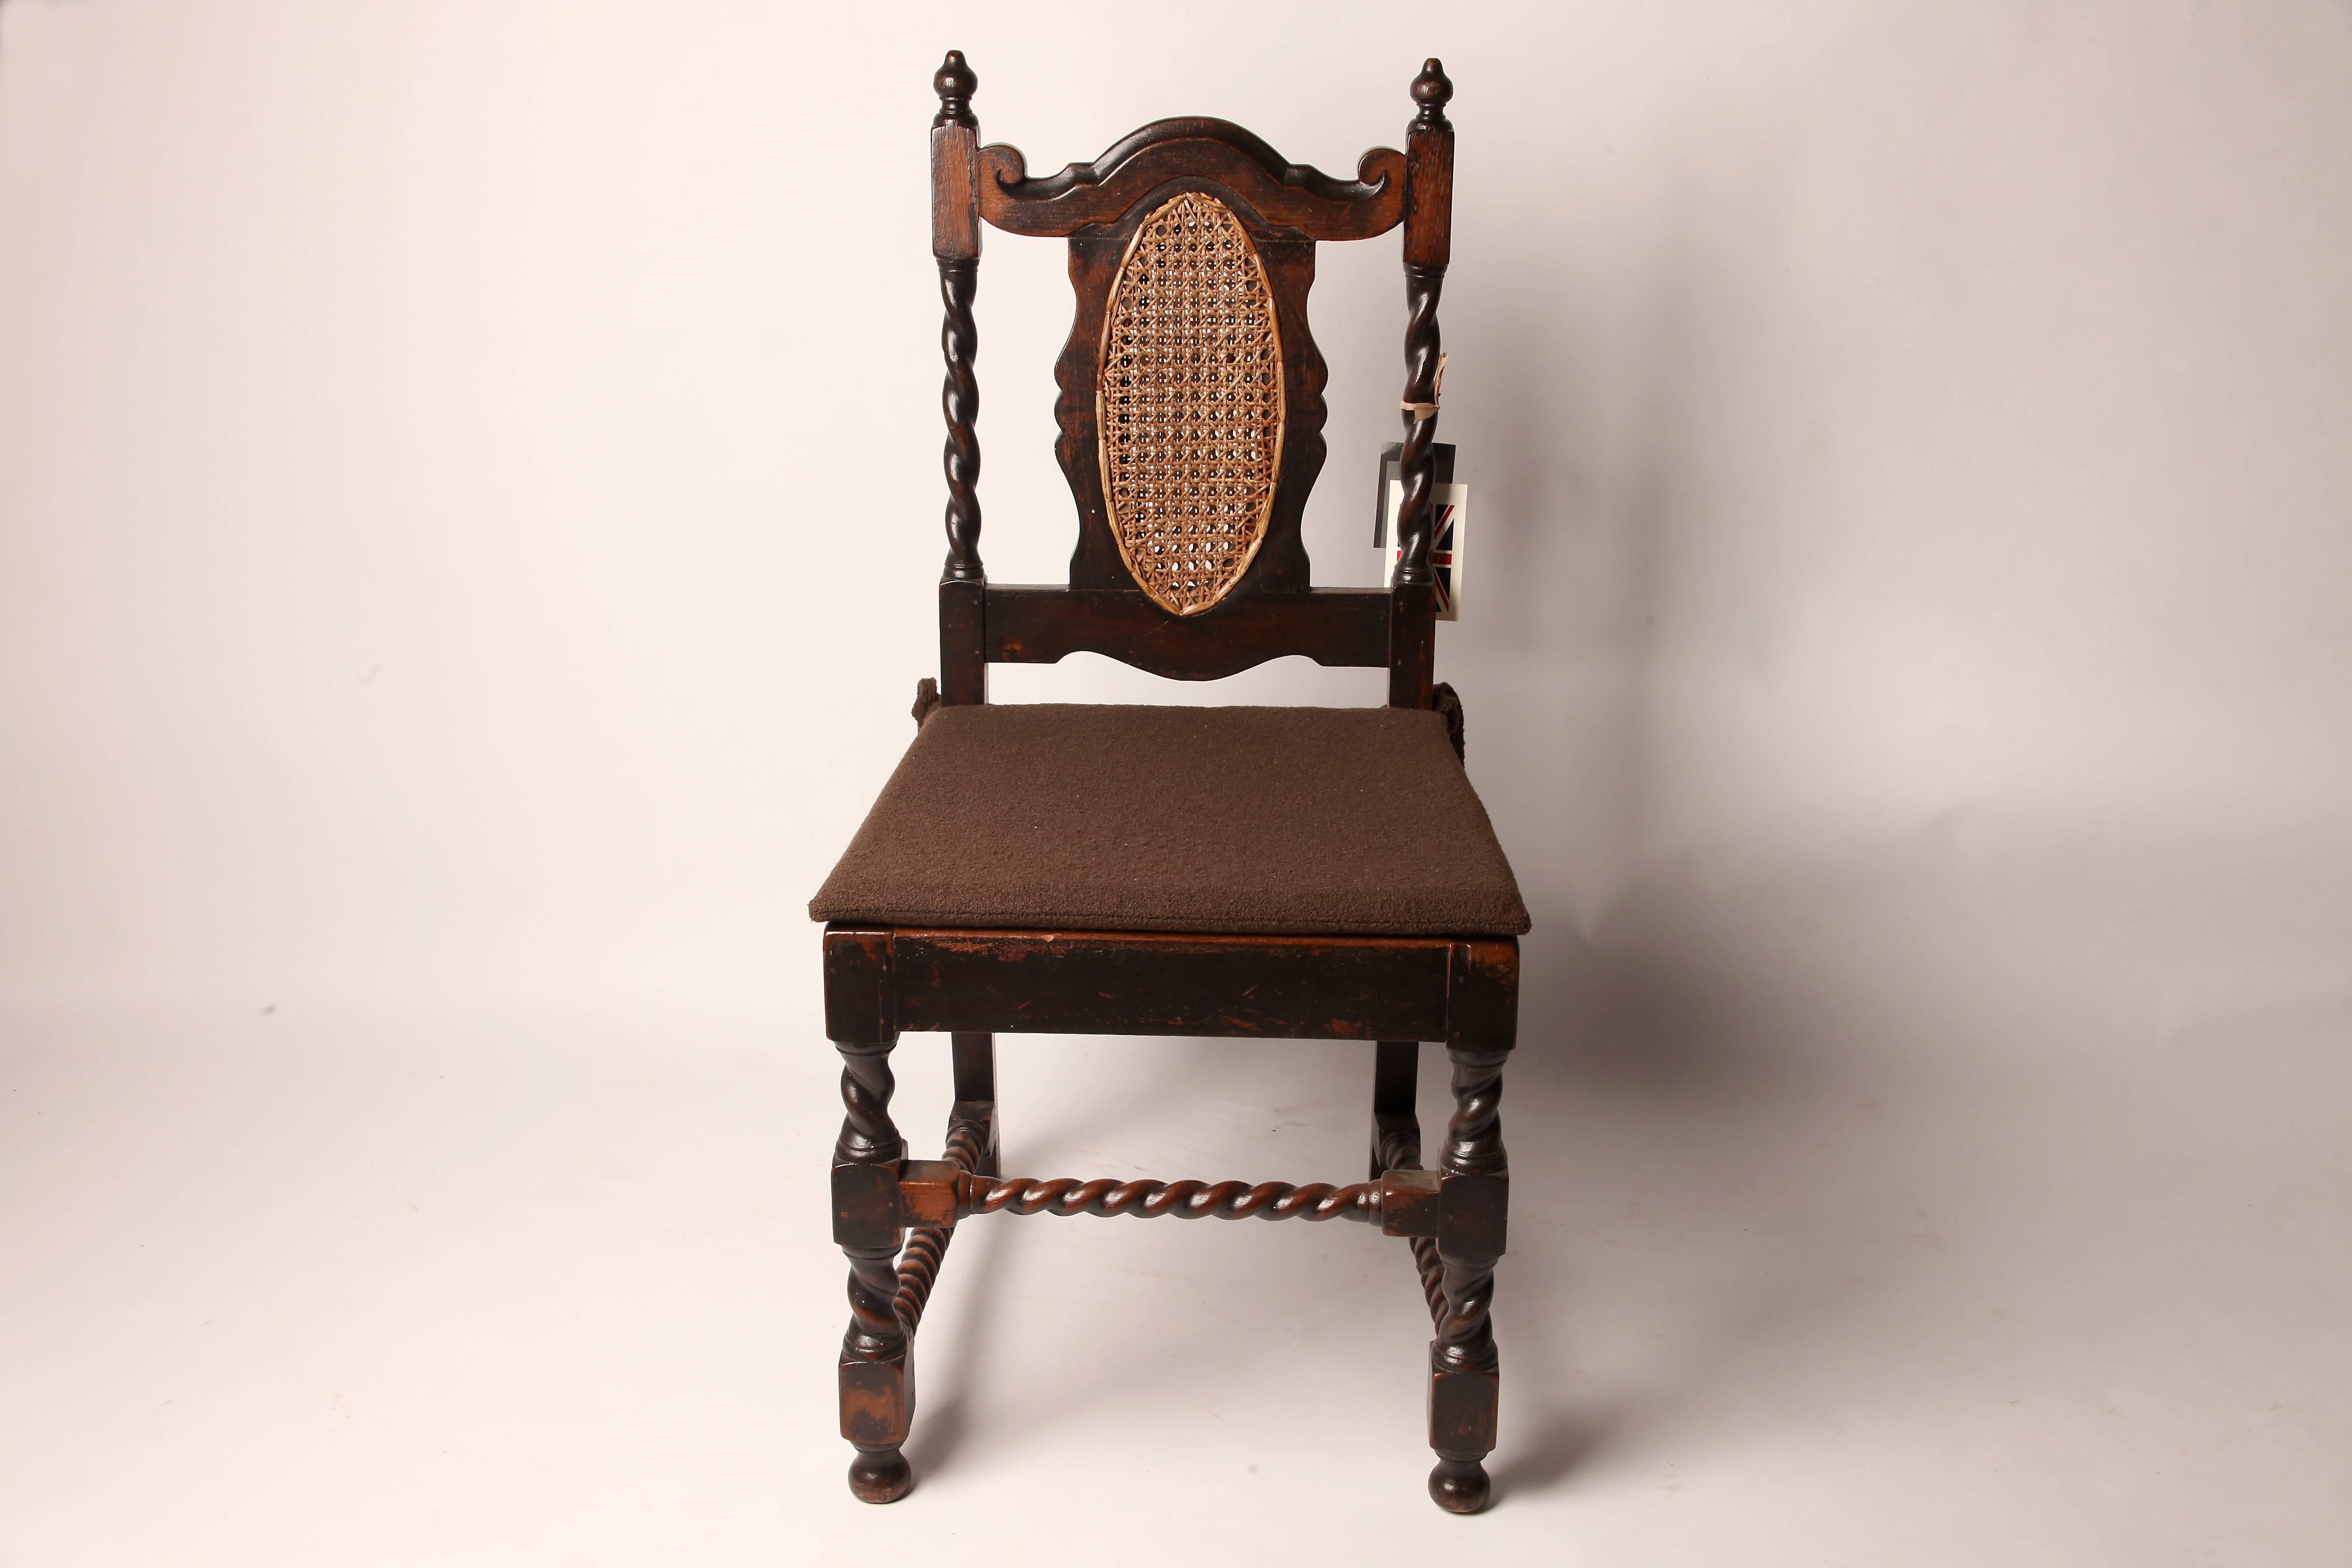 These British colonial side chairs are from India and made from teakwood. They feature rattan and barley twist spindles.